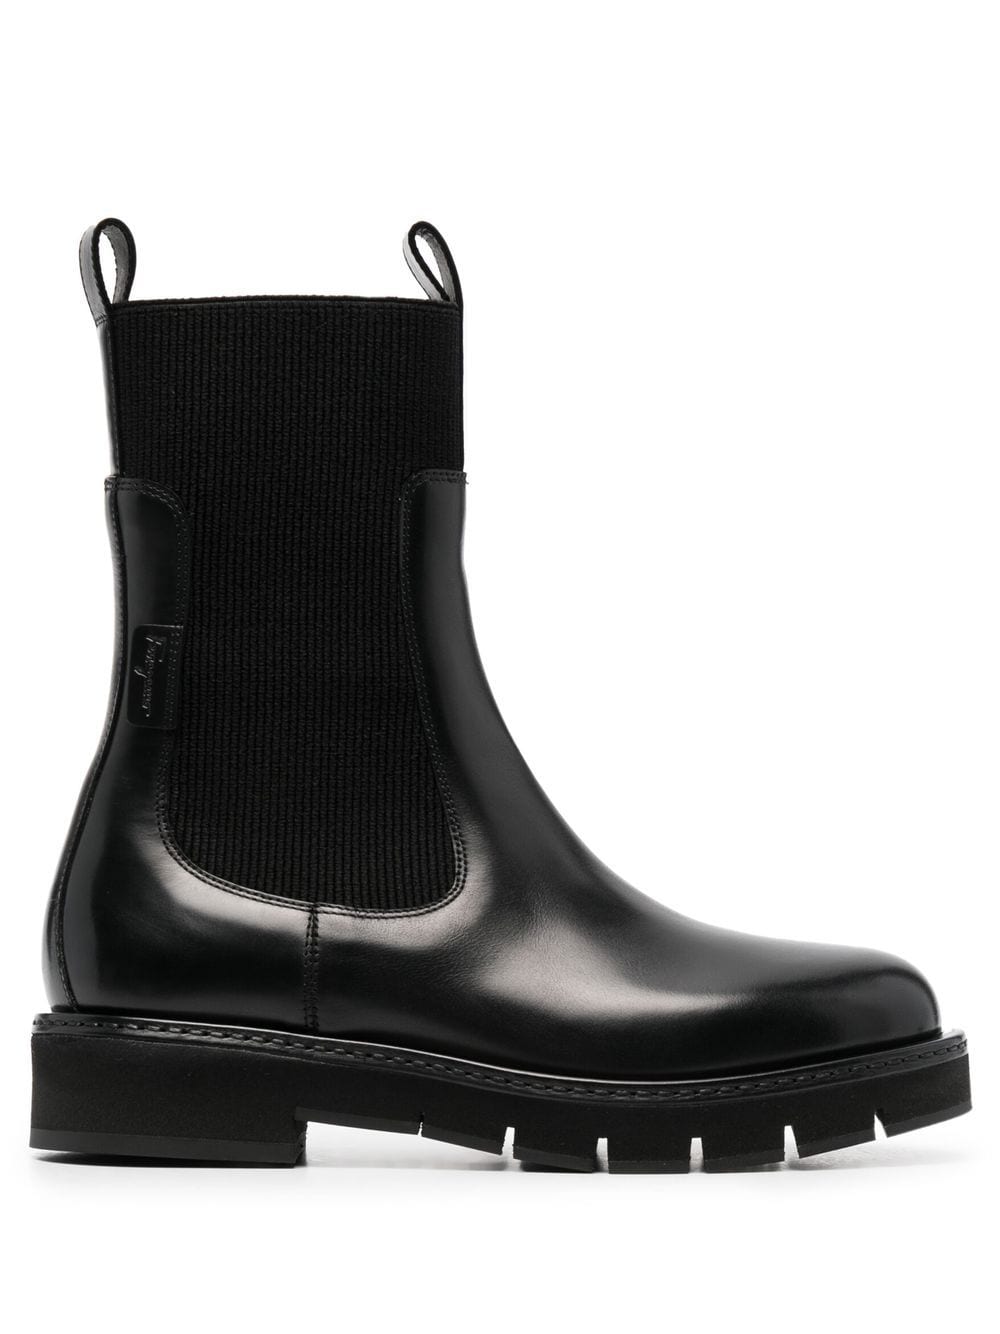 Ferragamo cleated-sole leather Chelsea boots - Black